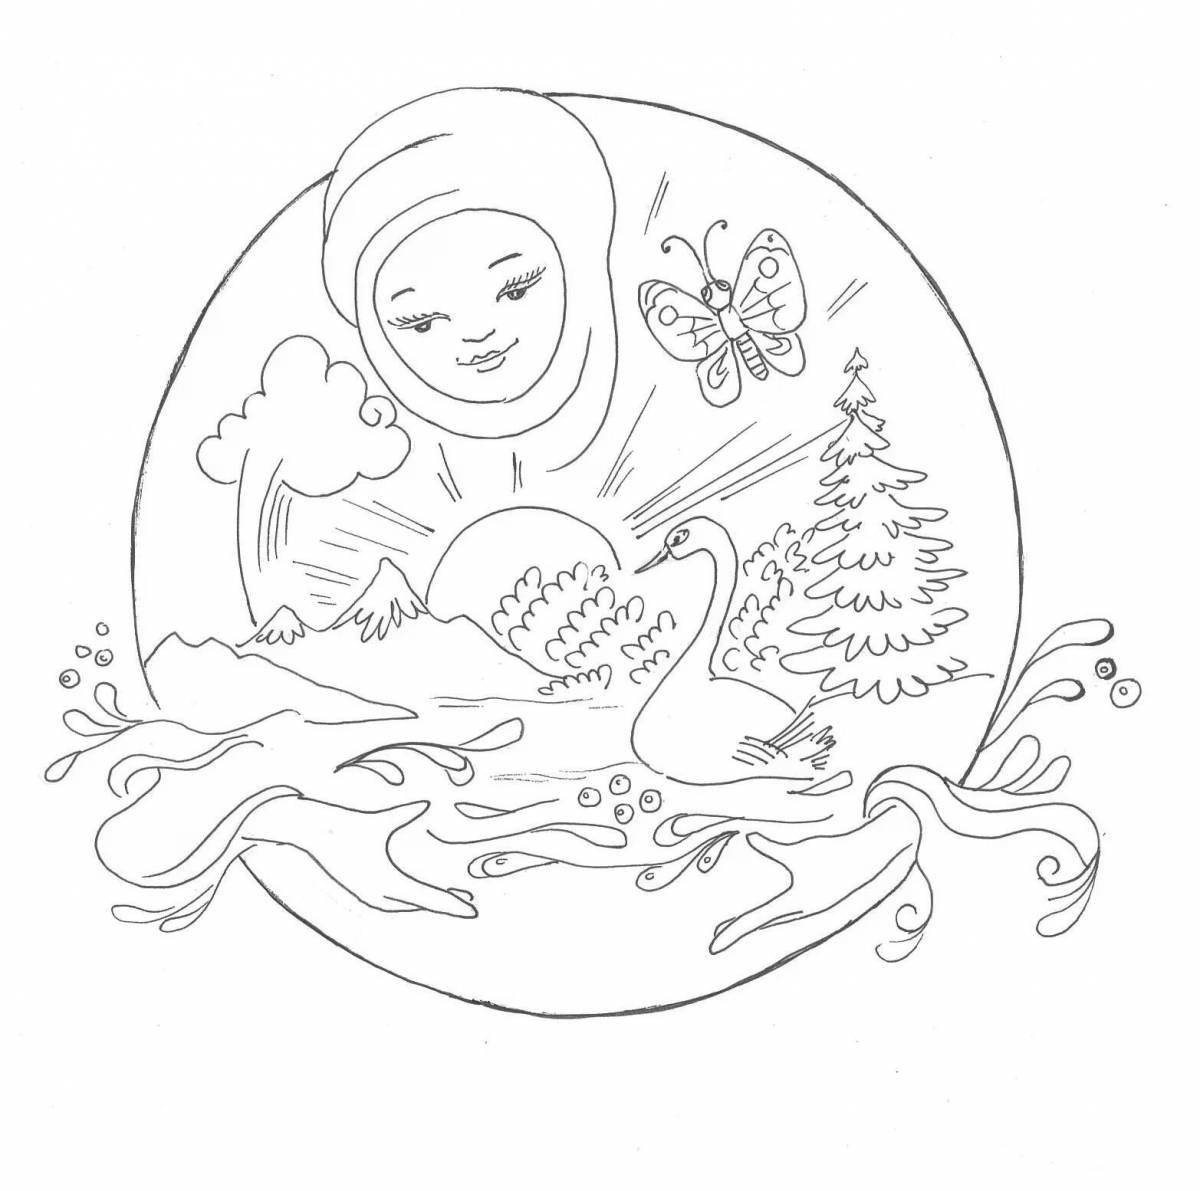 Coloring page merry holiday nauryz